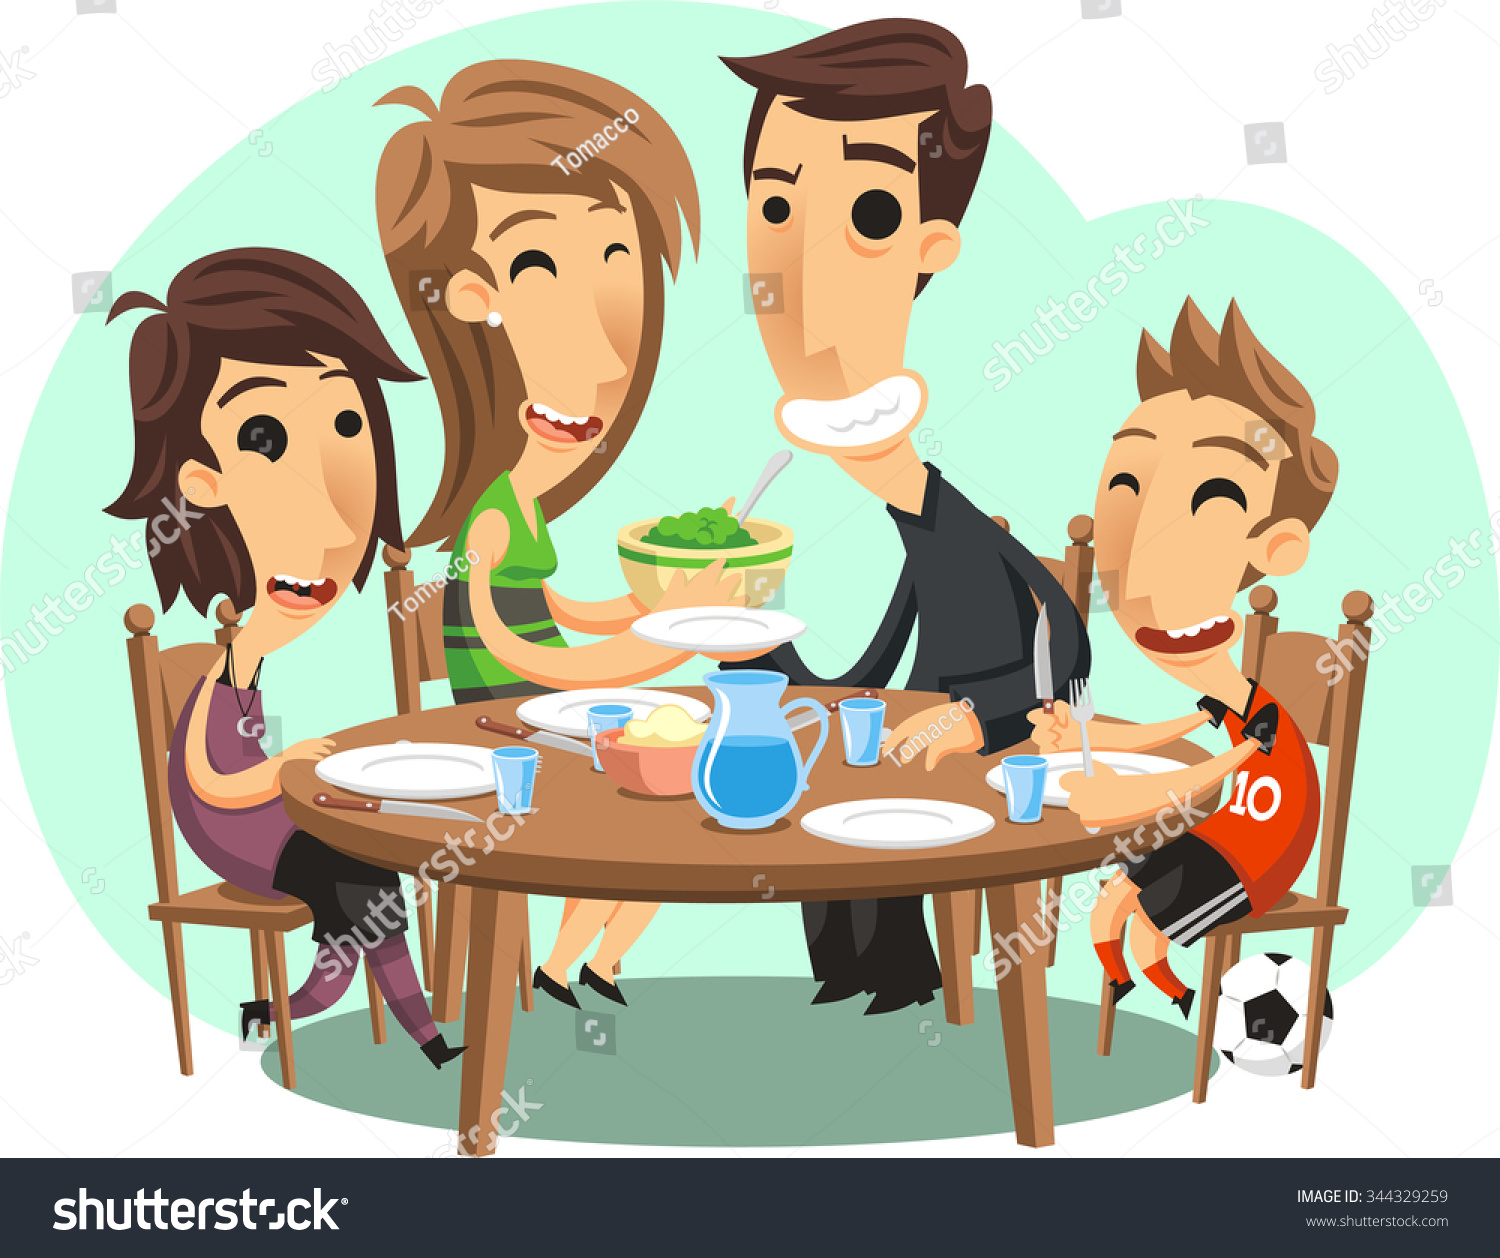 clipart family meal - photo #35